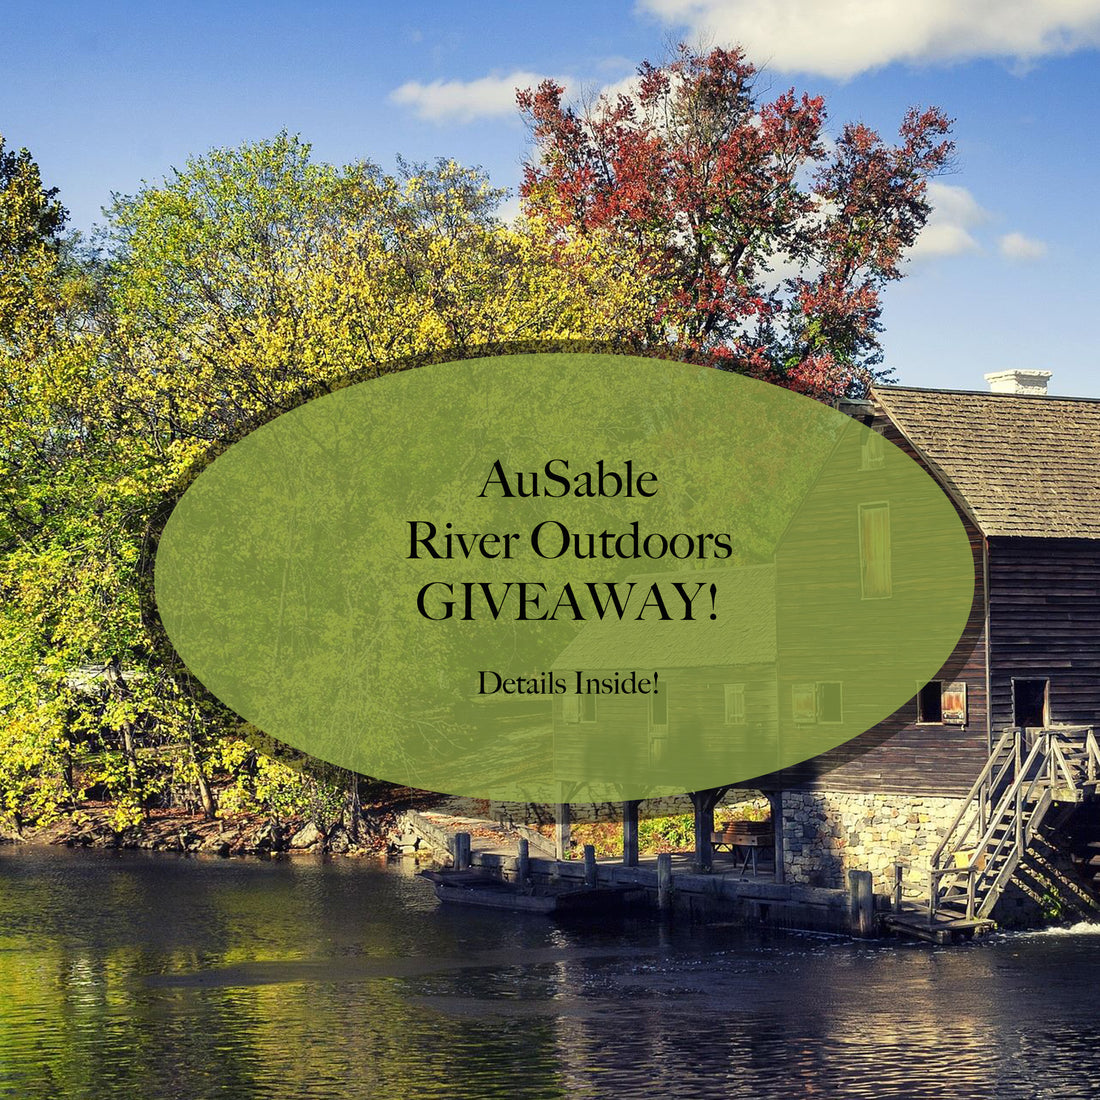 AuSable River Outdoors Giveaway